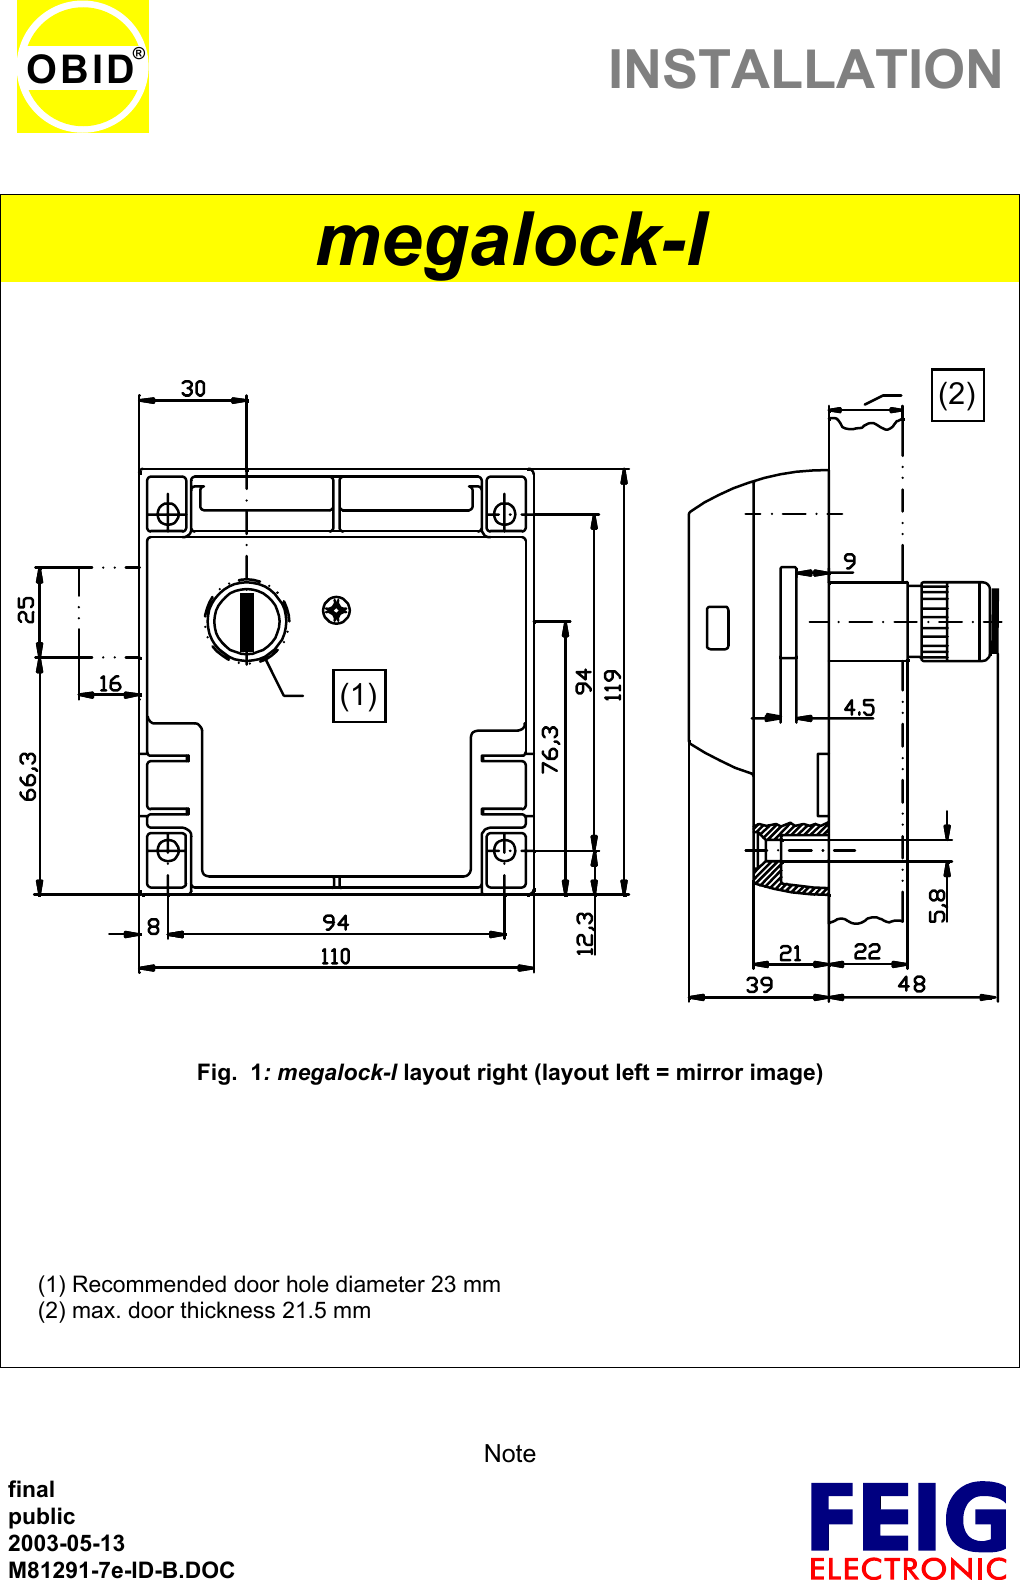 INSTALLATIONfinalpublic2003-05-13M81291-7e-ID-B.DOCOBID®megalock-l(1)(2)Fig.  1: megalock-l layout right (layout left = mirror image)(1) Recommended door hole diameter 23 mm(2) max. door thickness 21.5 mmNote